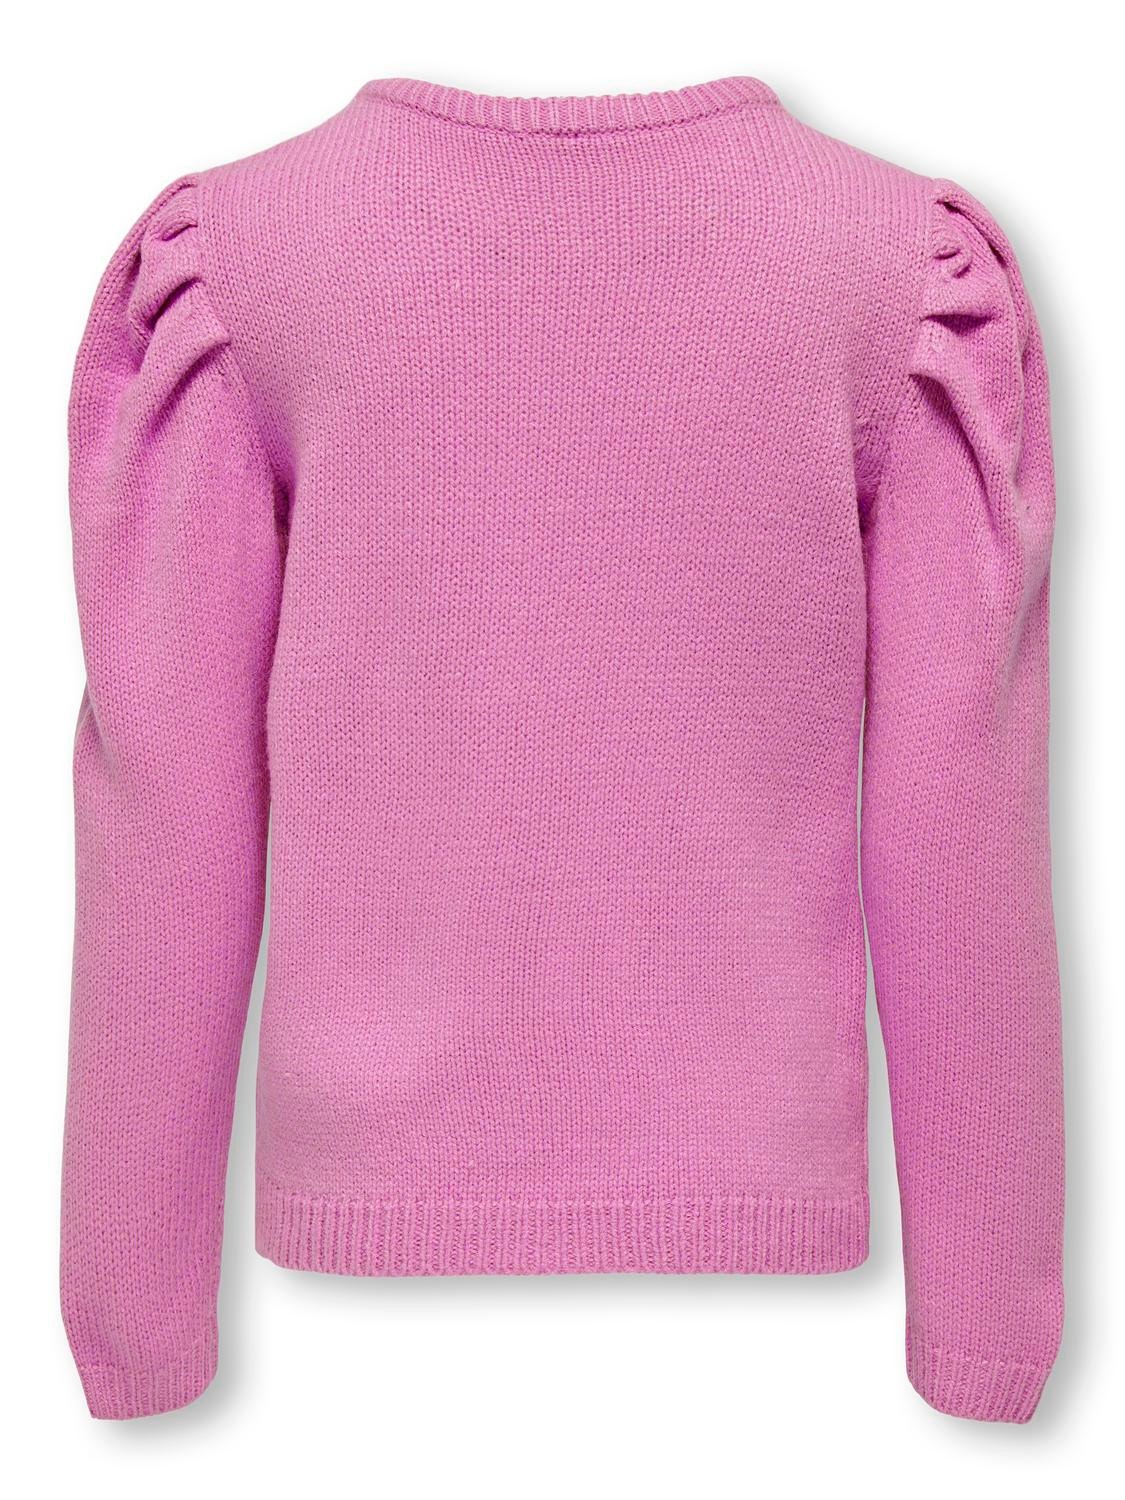 ONLY o-neck knitted pullover with puff sleeves -Moonlite Mauve - 15306862